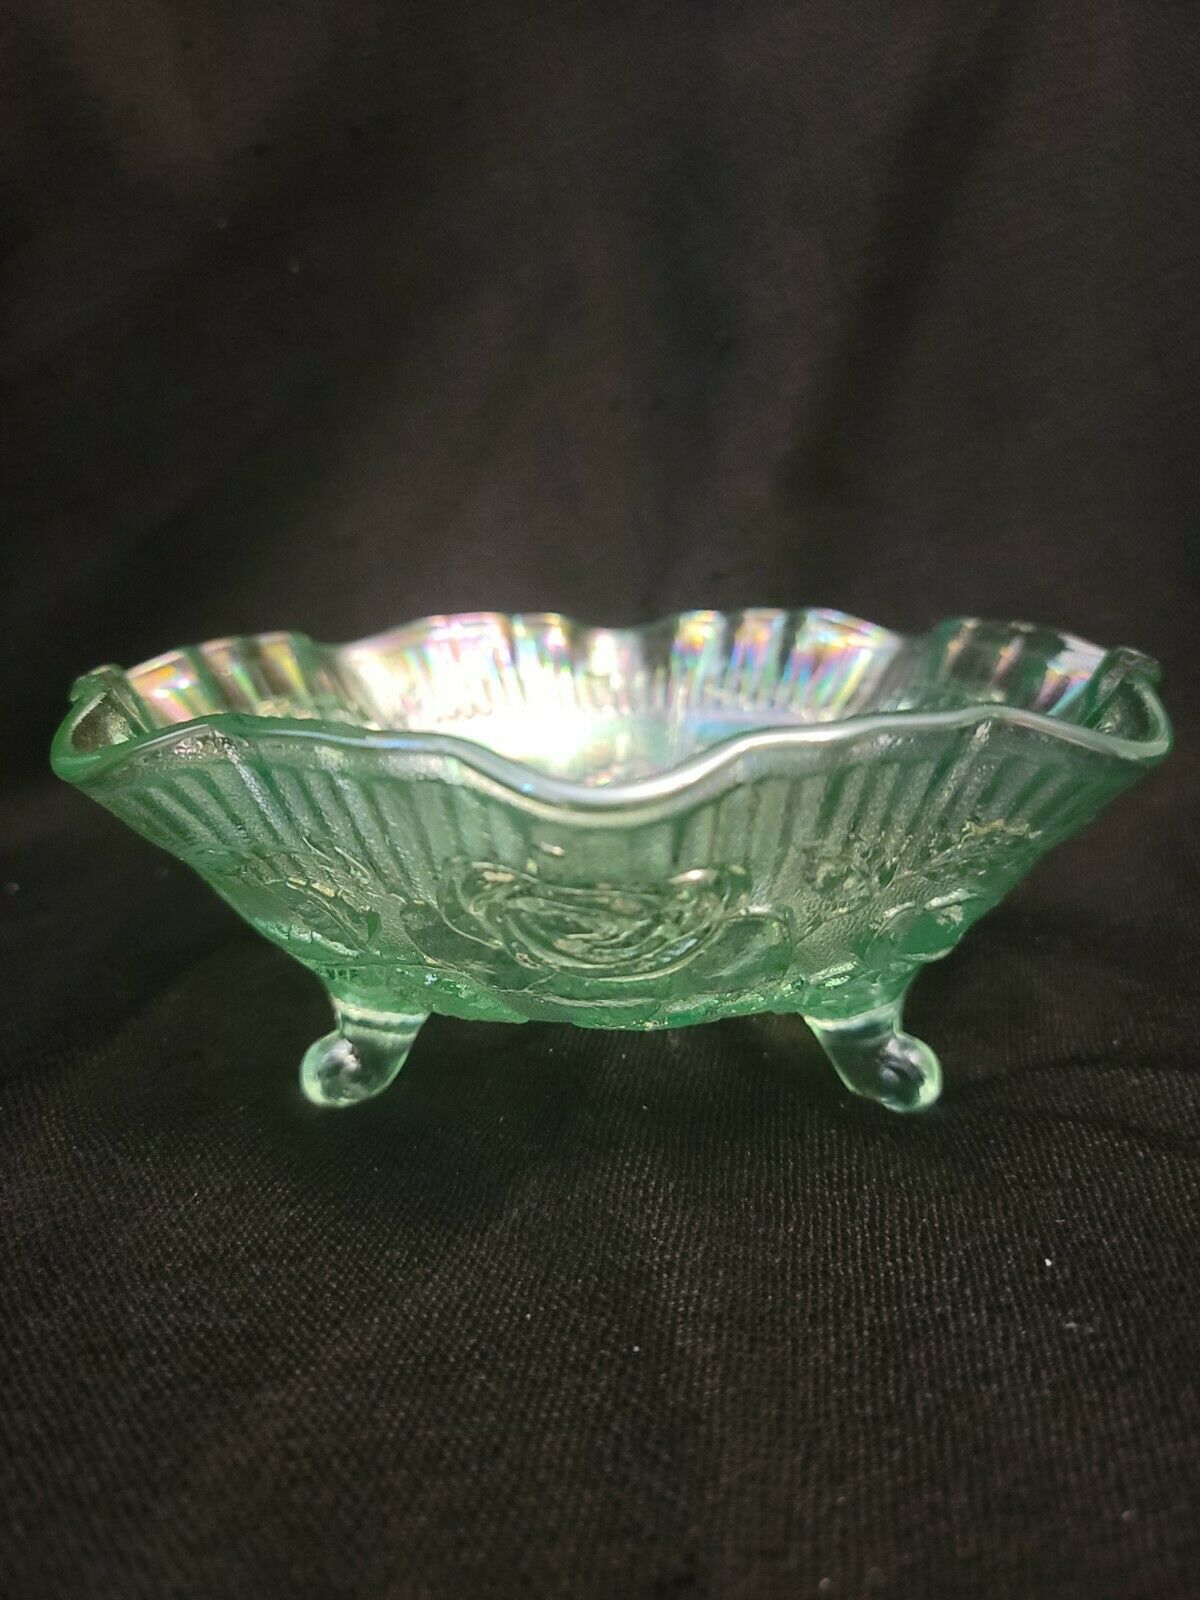 Lovely Green Imperial Open Rose Carnival Glass Footed Bowl Ruffled Edges